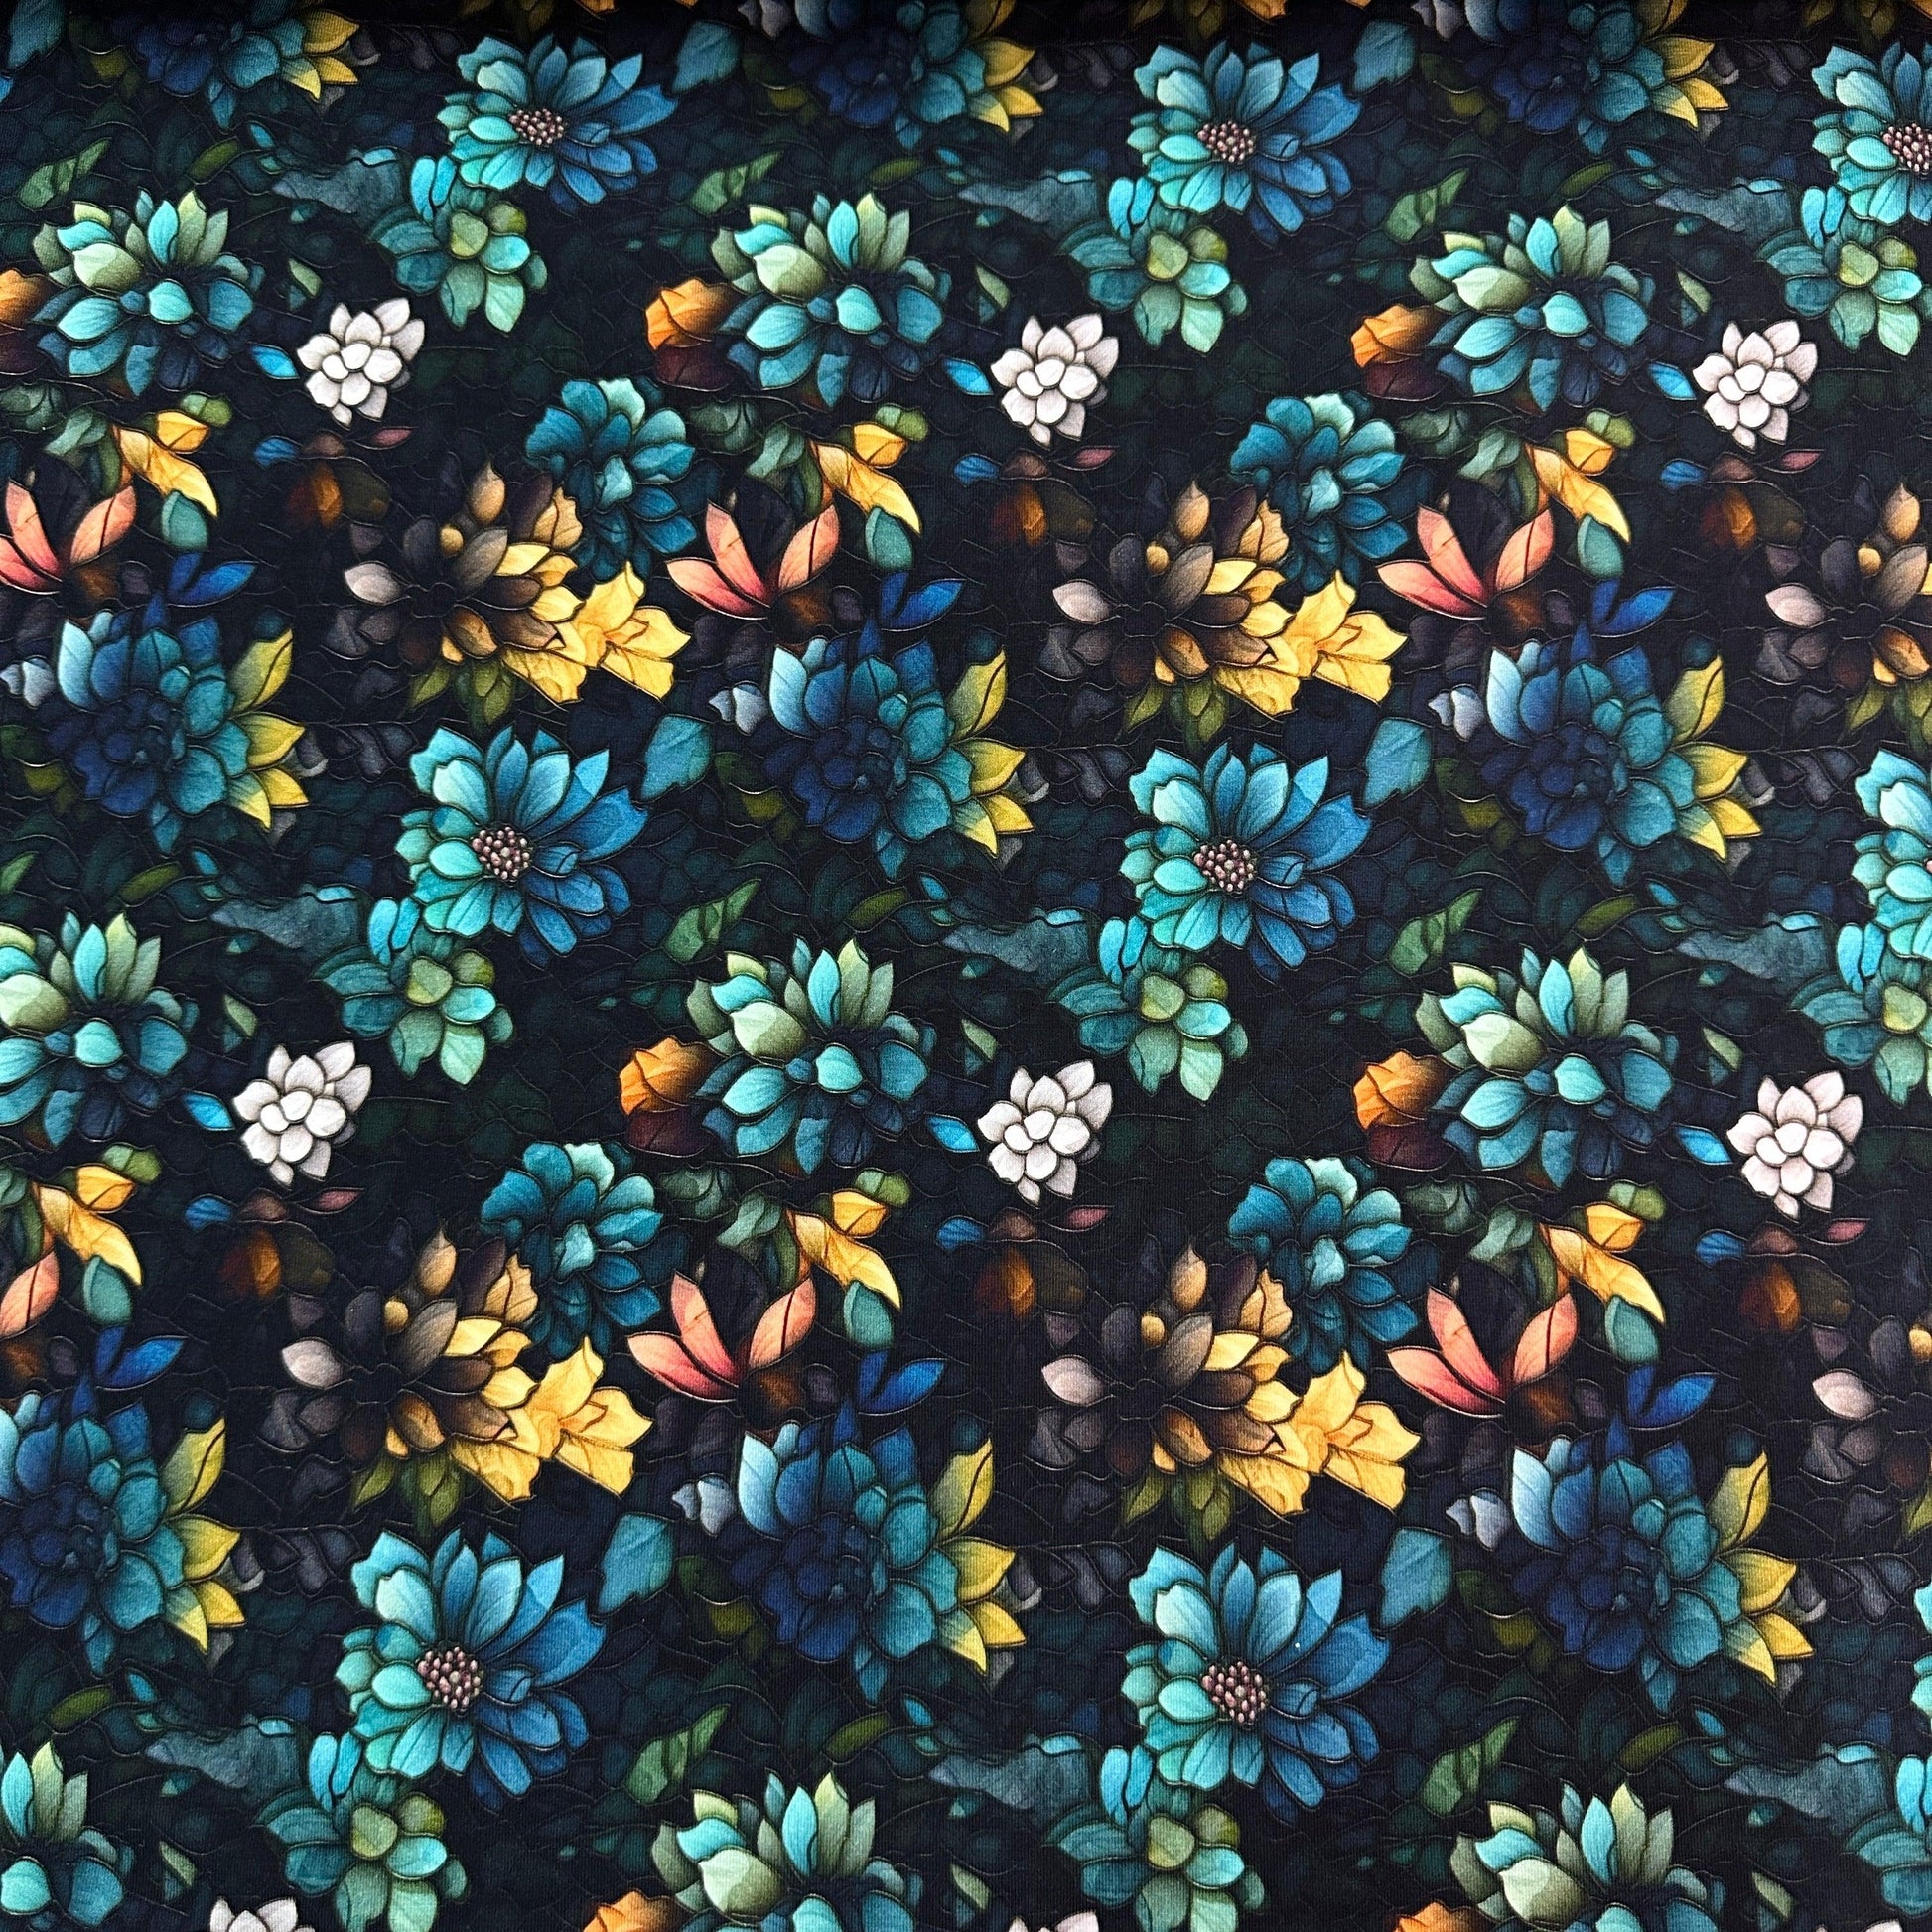 Stained Glass Teal and Gold Flowers on Organic Cotton/Spandex Jersey Fabric - Nature's Fabrics